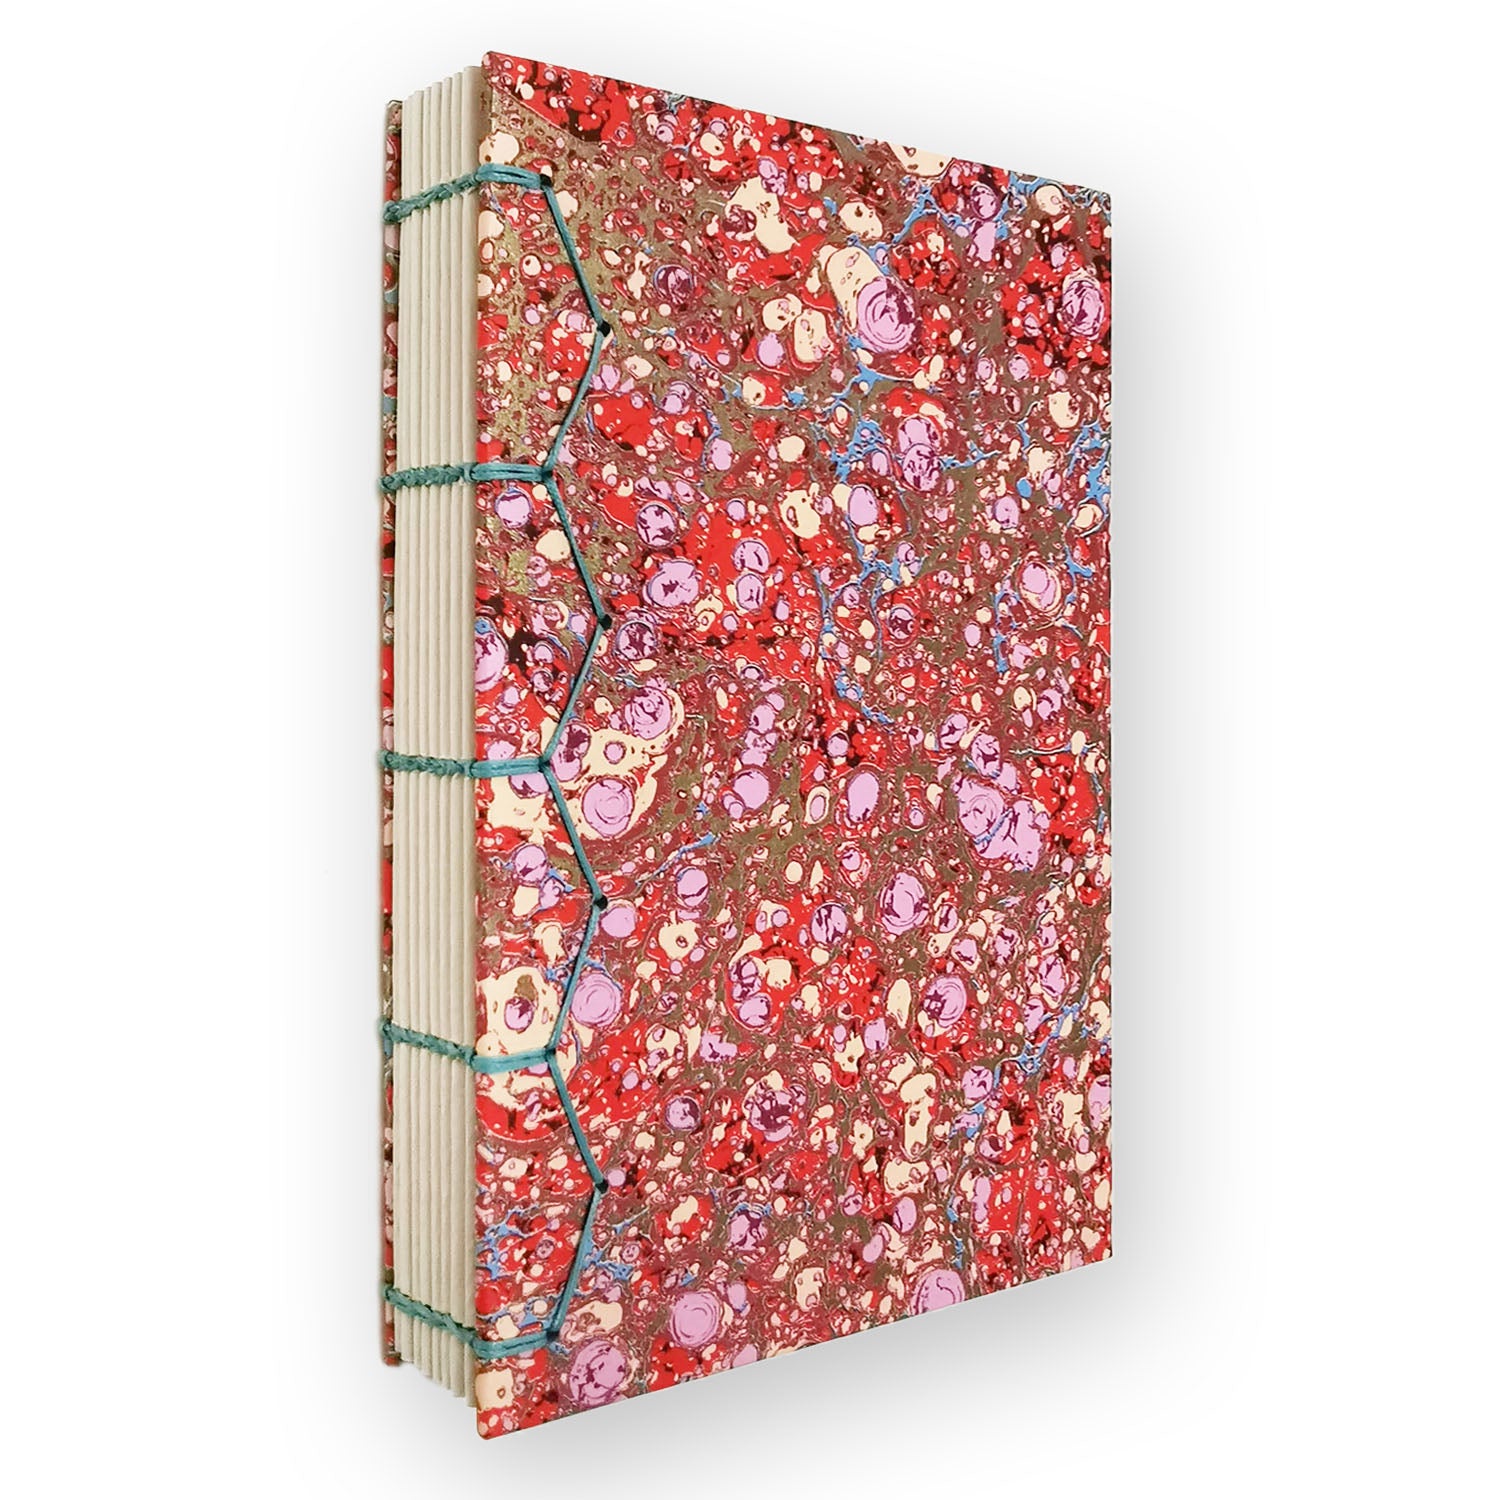 Handmade Notebook with Byzantine Binding - Marble Paste Red